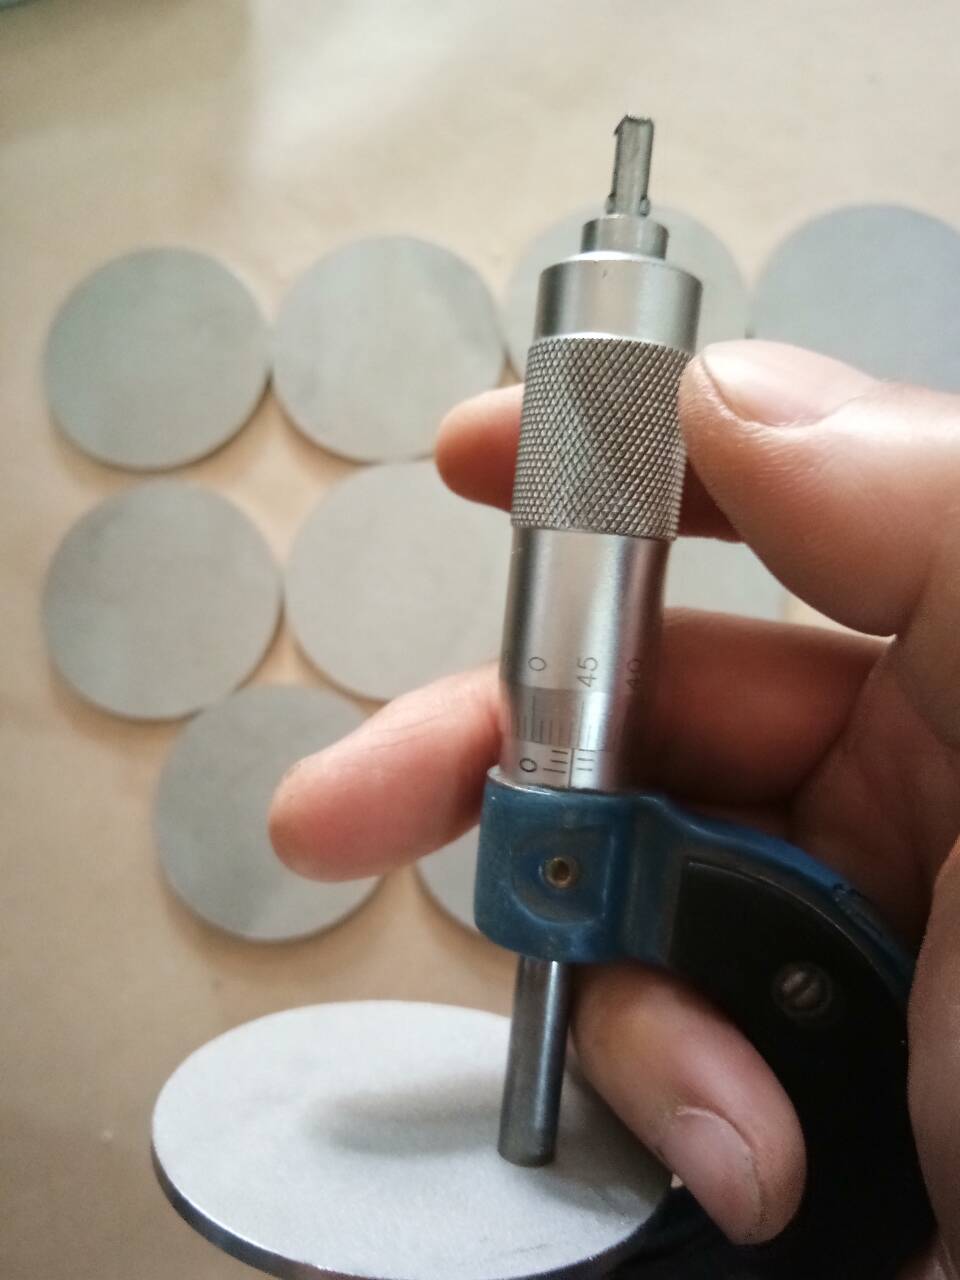 316L Stainless Steel Sintered Porous Metal Filter Disc